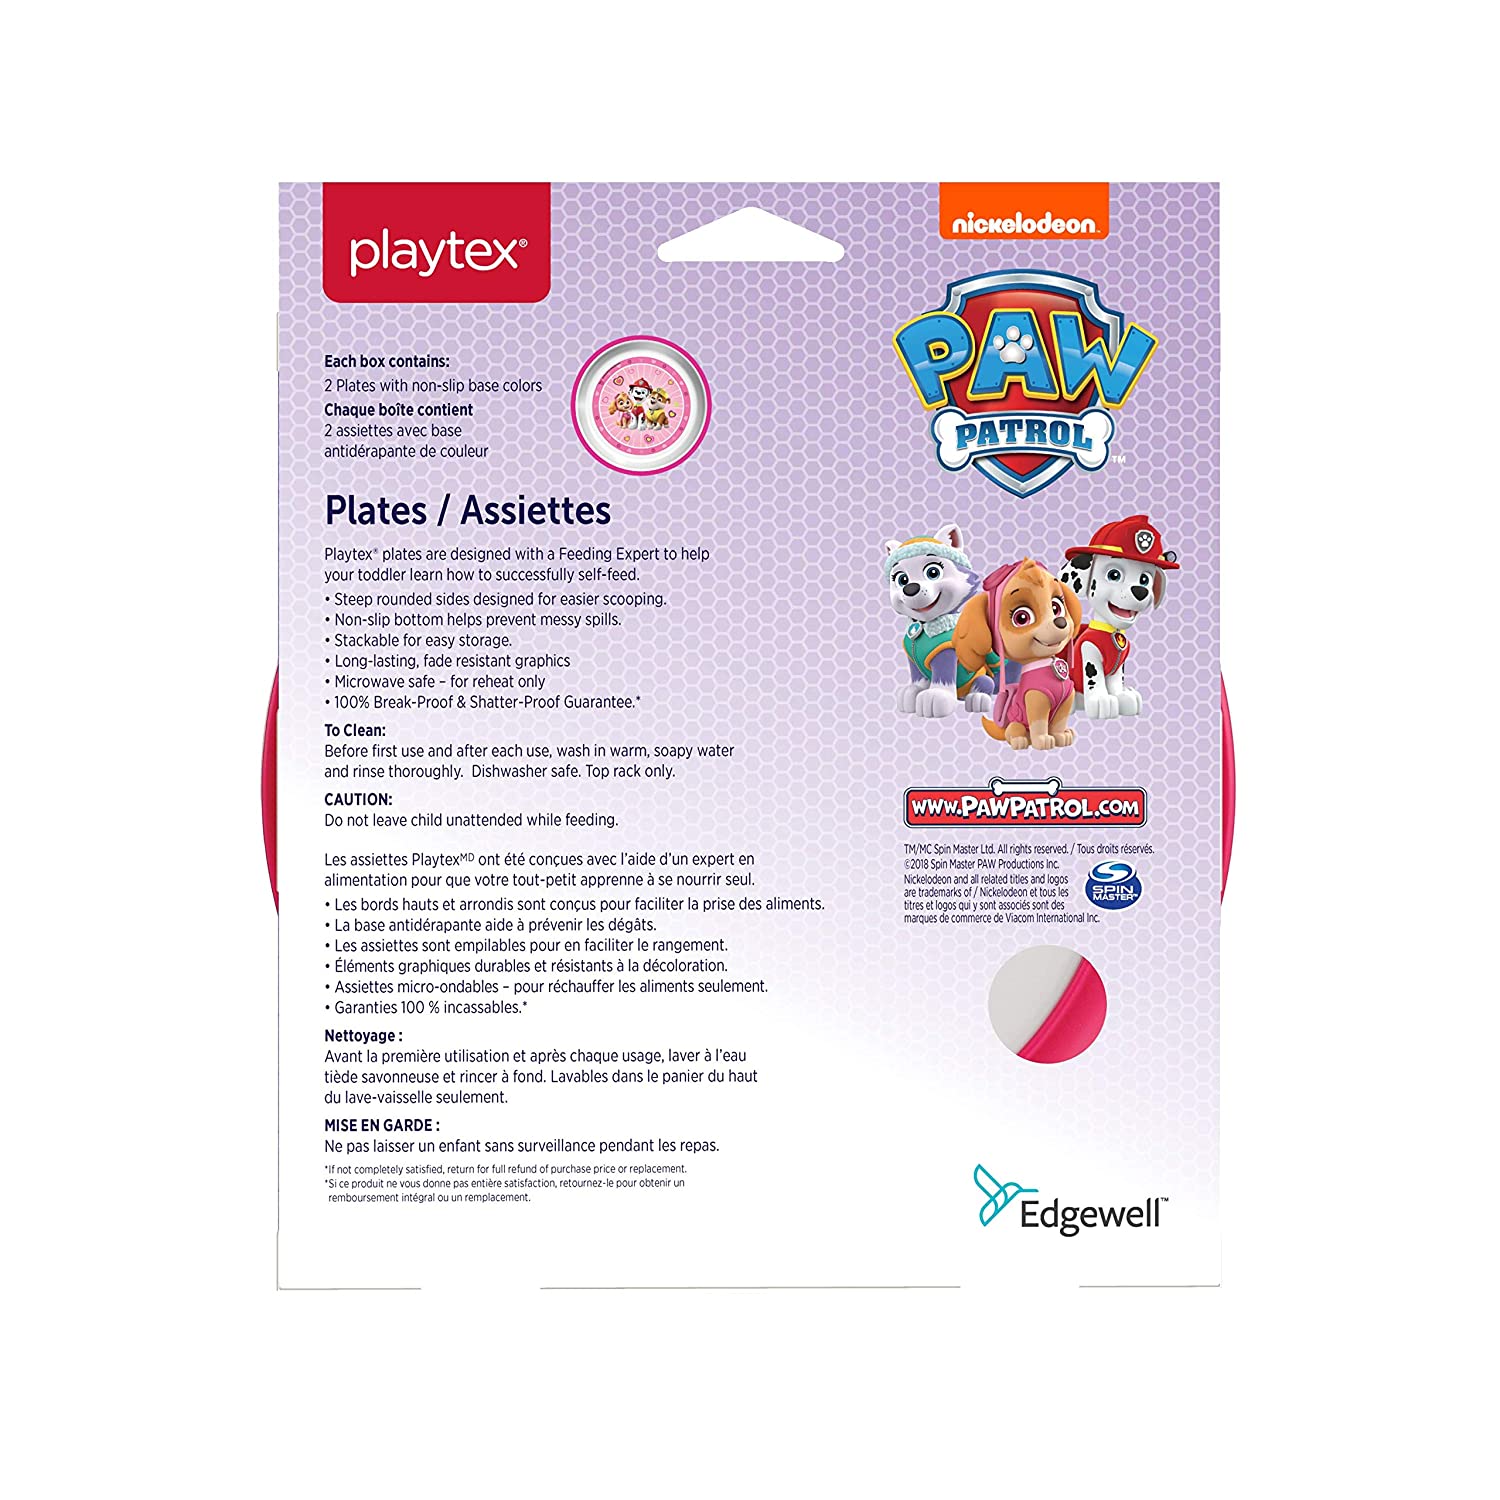 Playtex® Paw Patrol™ Never Fade, Never Peel 2 Pack Plates  - PINK